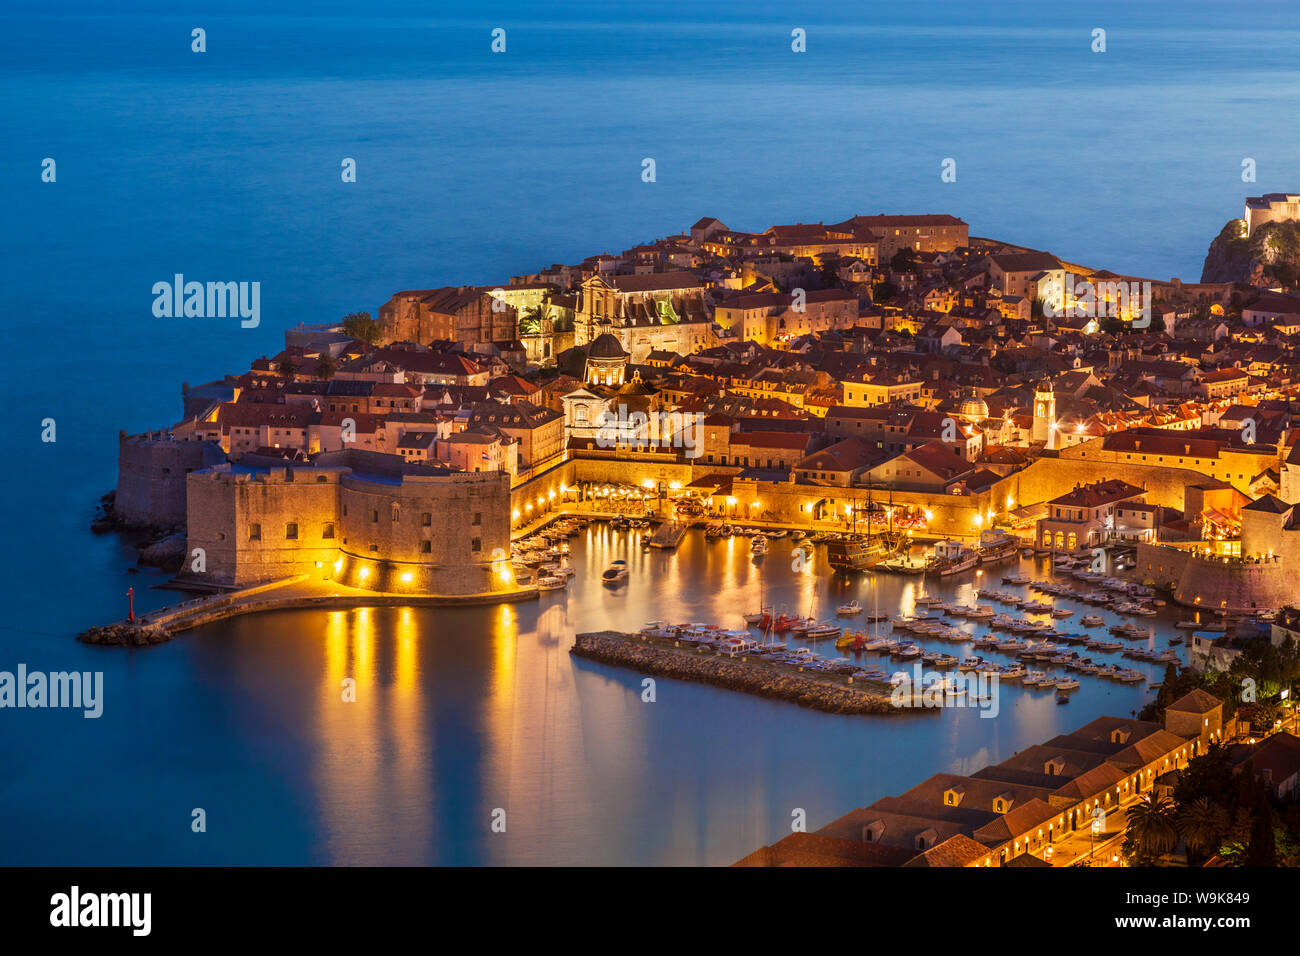 Aerial view of Old Port and Dubrovnik Old Town at night, UNESCO World Heritage Site, Dubrovnik, Dalmatian Coast, Croatia, Europe Stock Photo